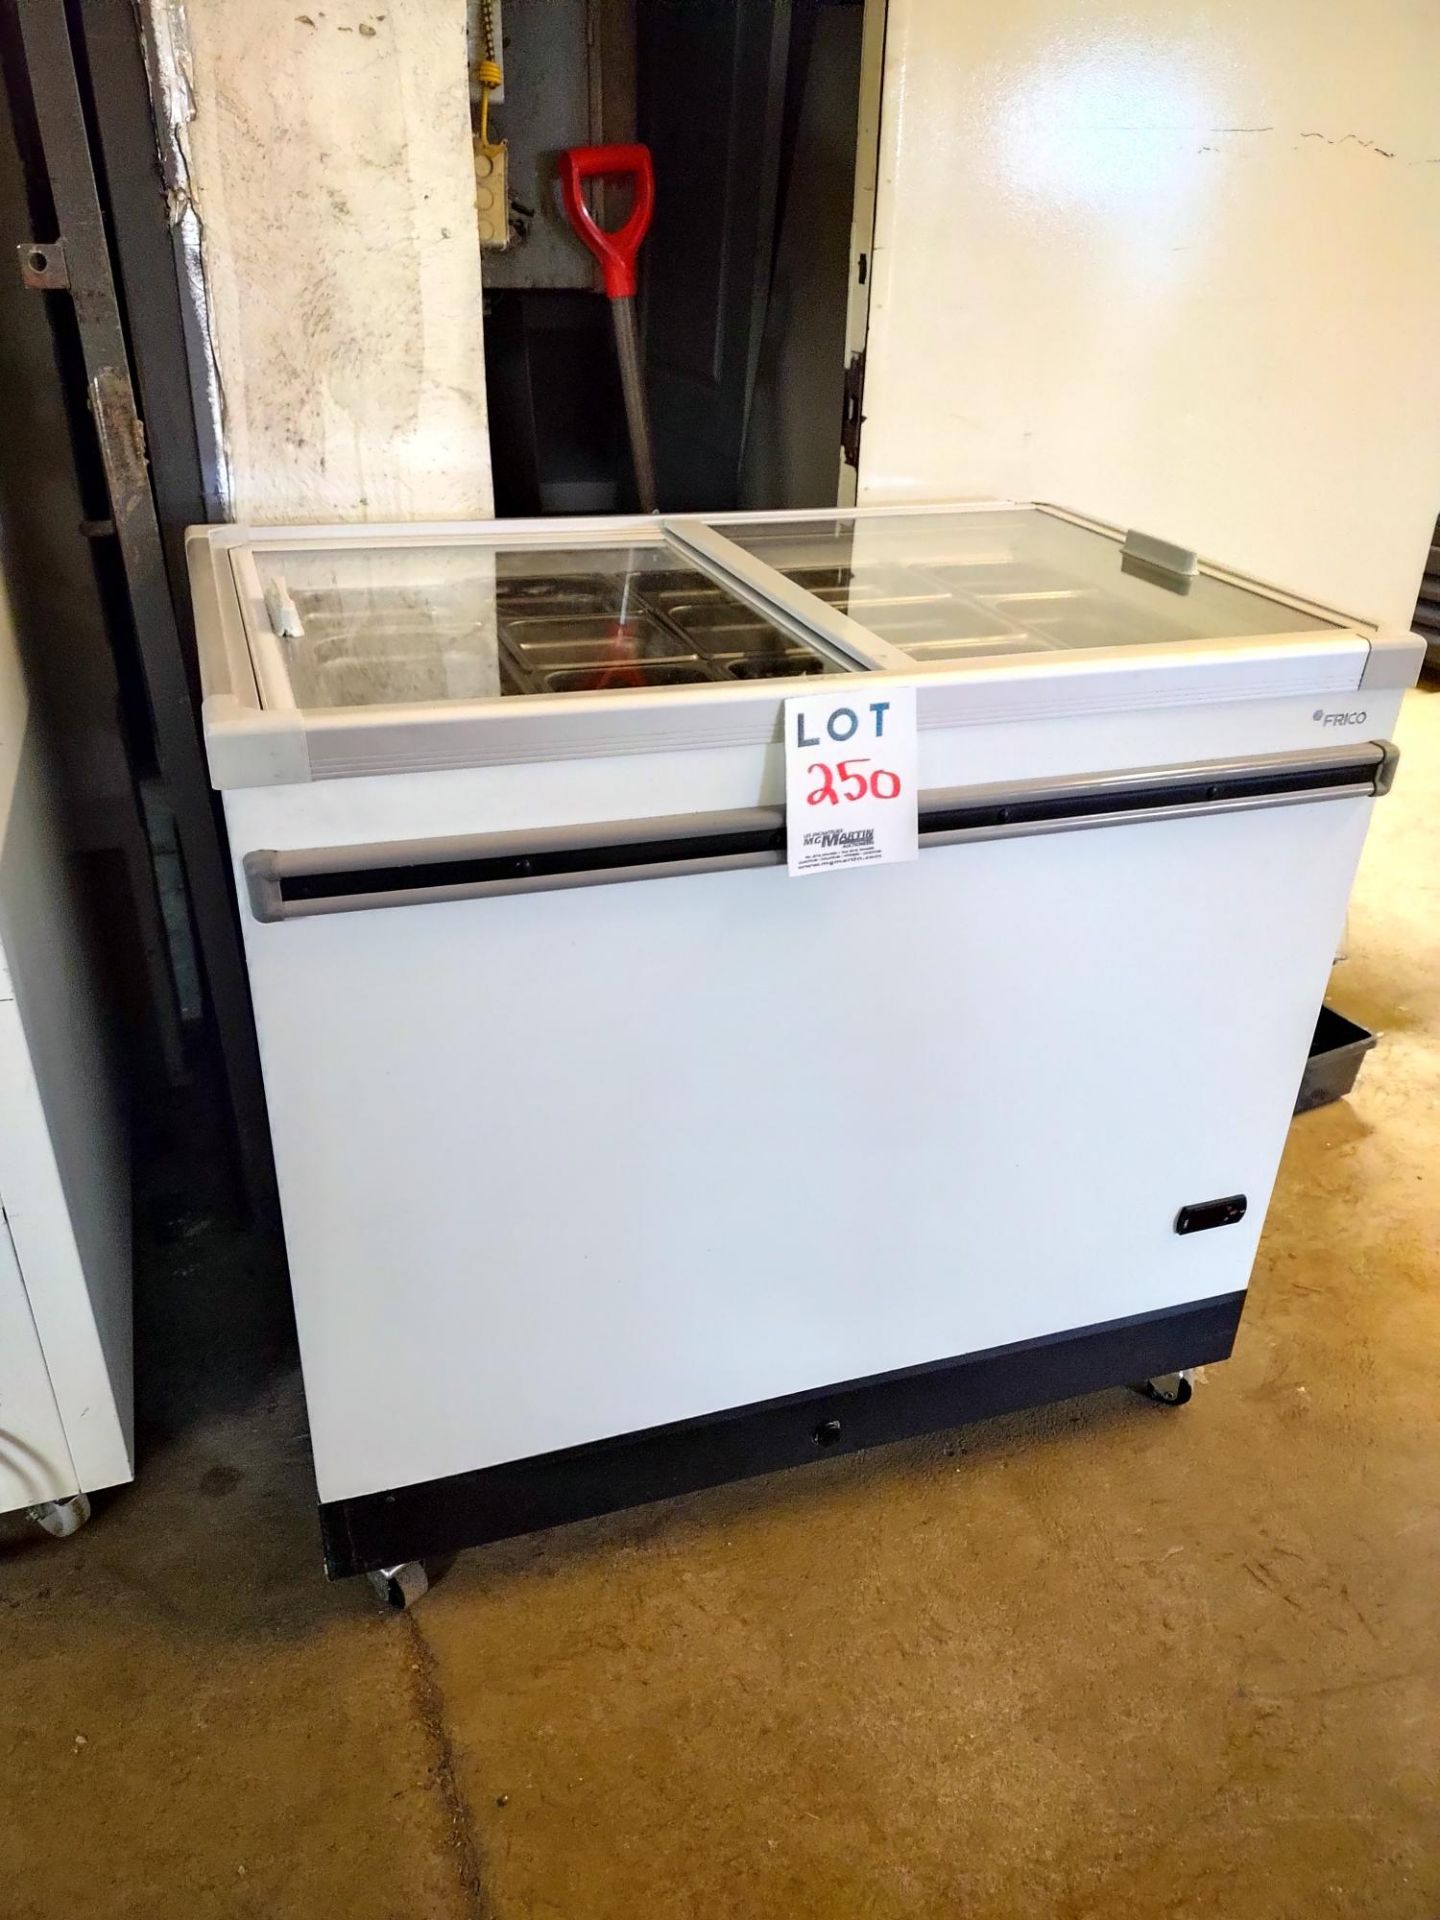 FRICO refrigerated preparation unit on wheels approx. 40"w x 25"d x 36"h